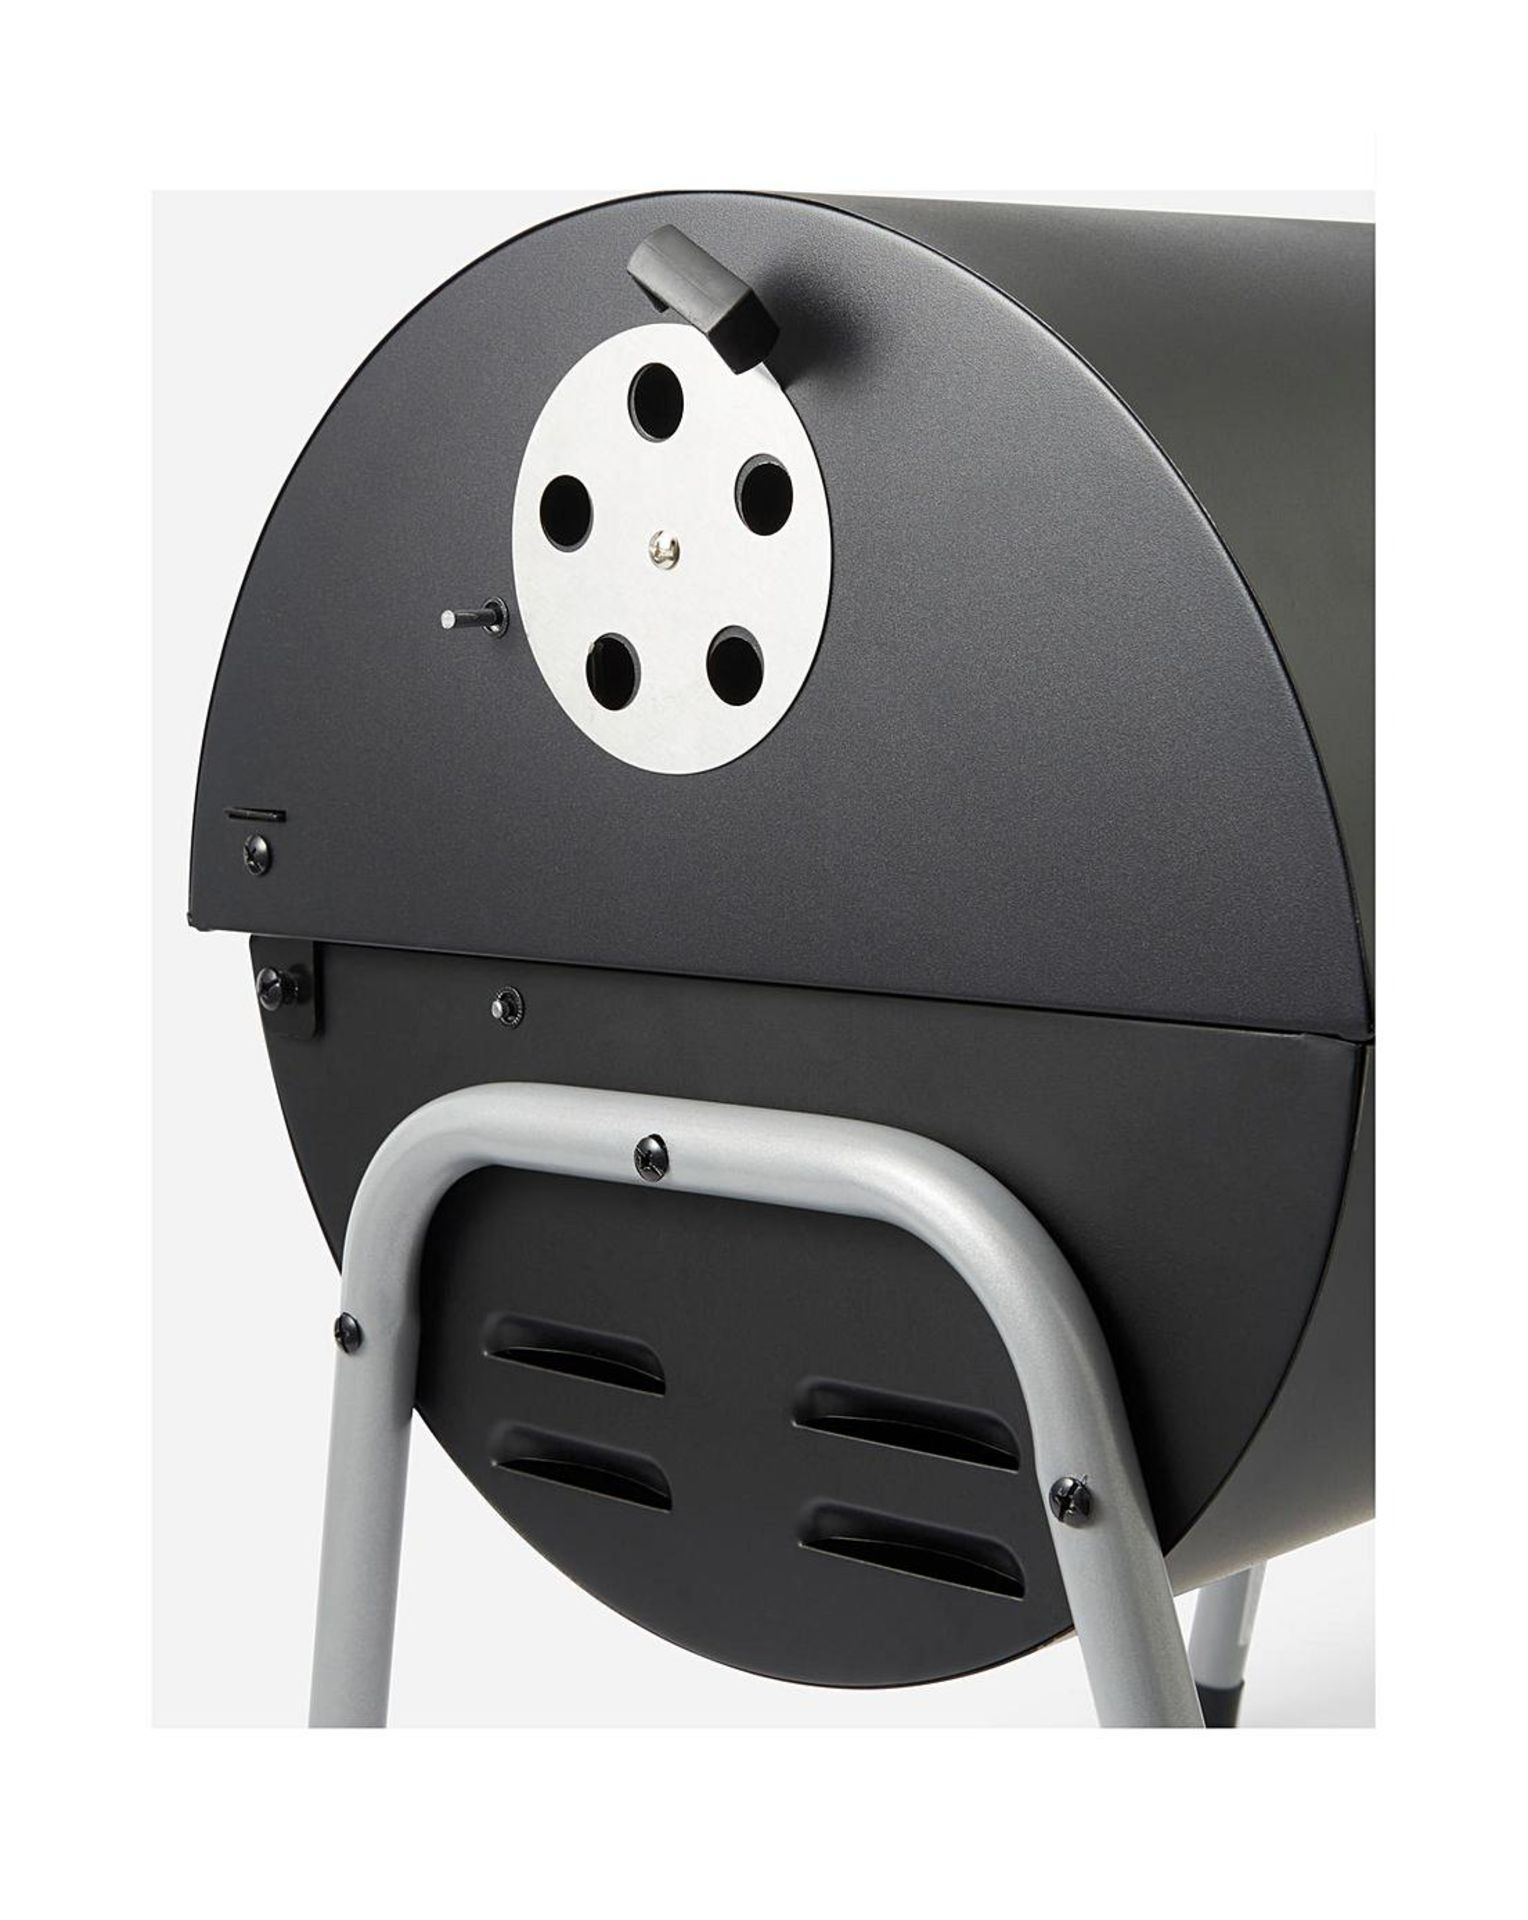 TRADE LOT 12x BRAND NEW Tabletop Oil Drum Barbeque Grill. RRP £59.99 EACH. Black steel firebowl with - Image 4 of 4